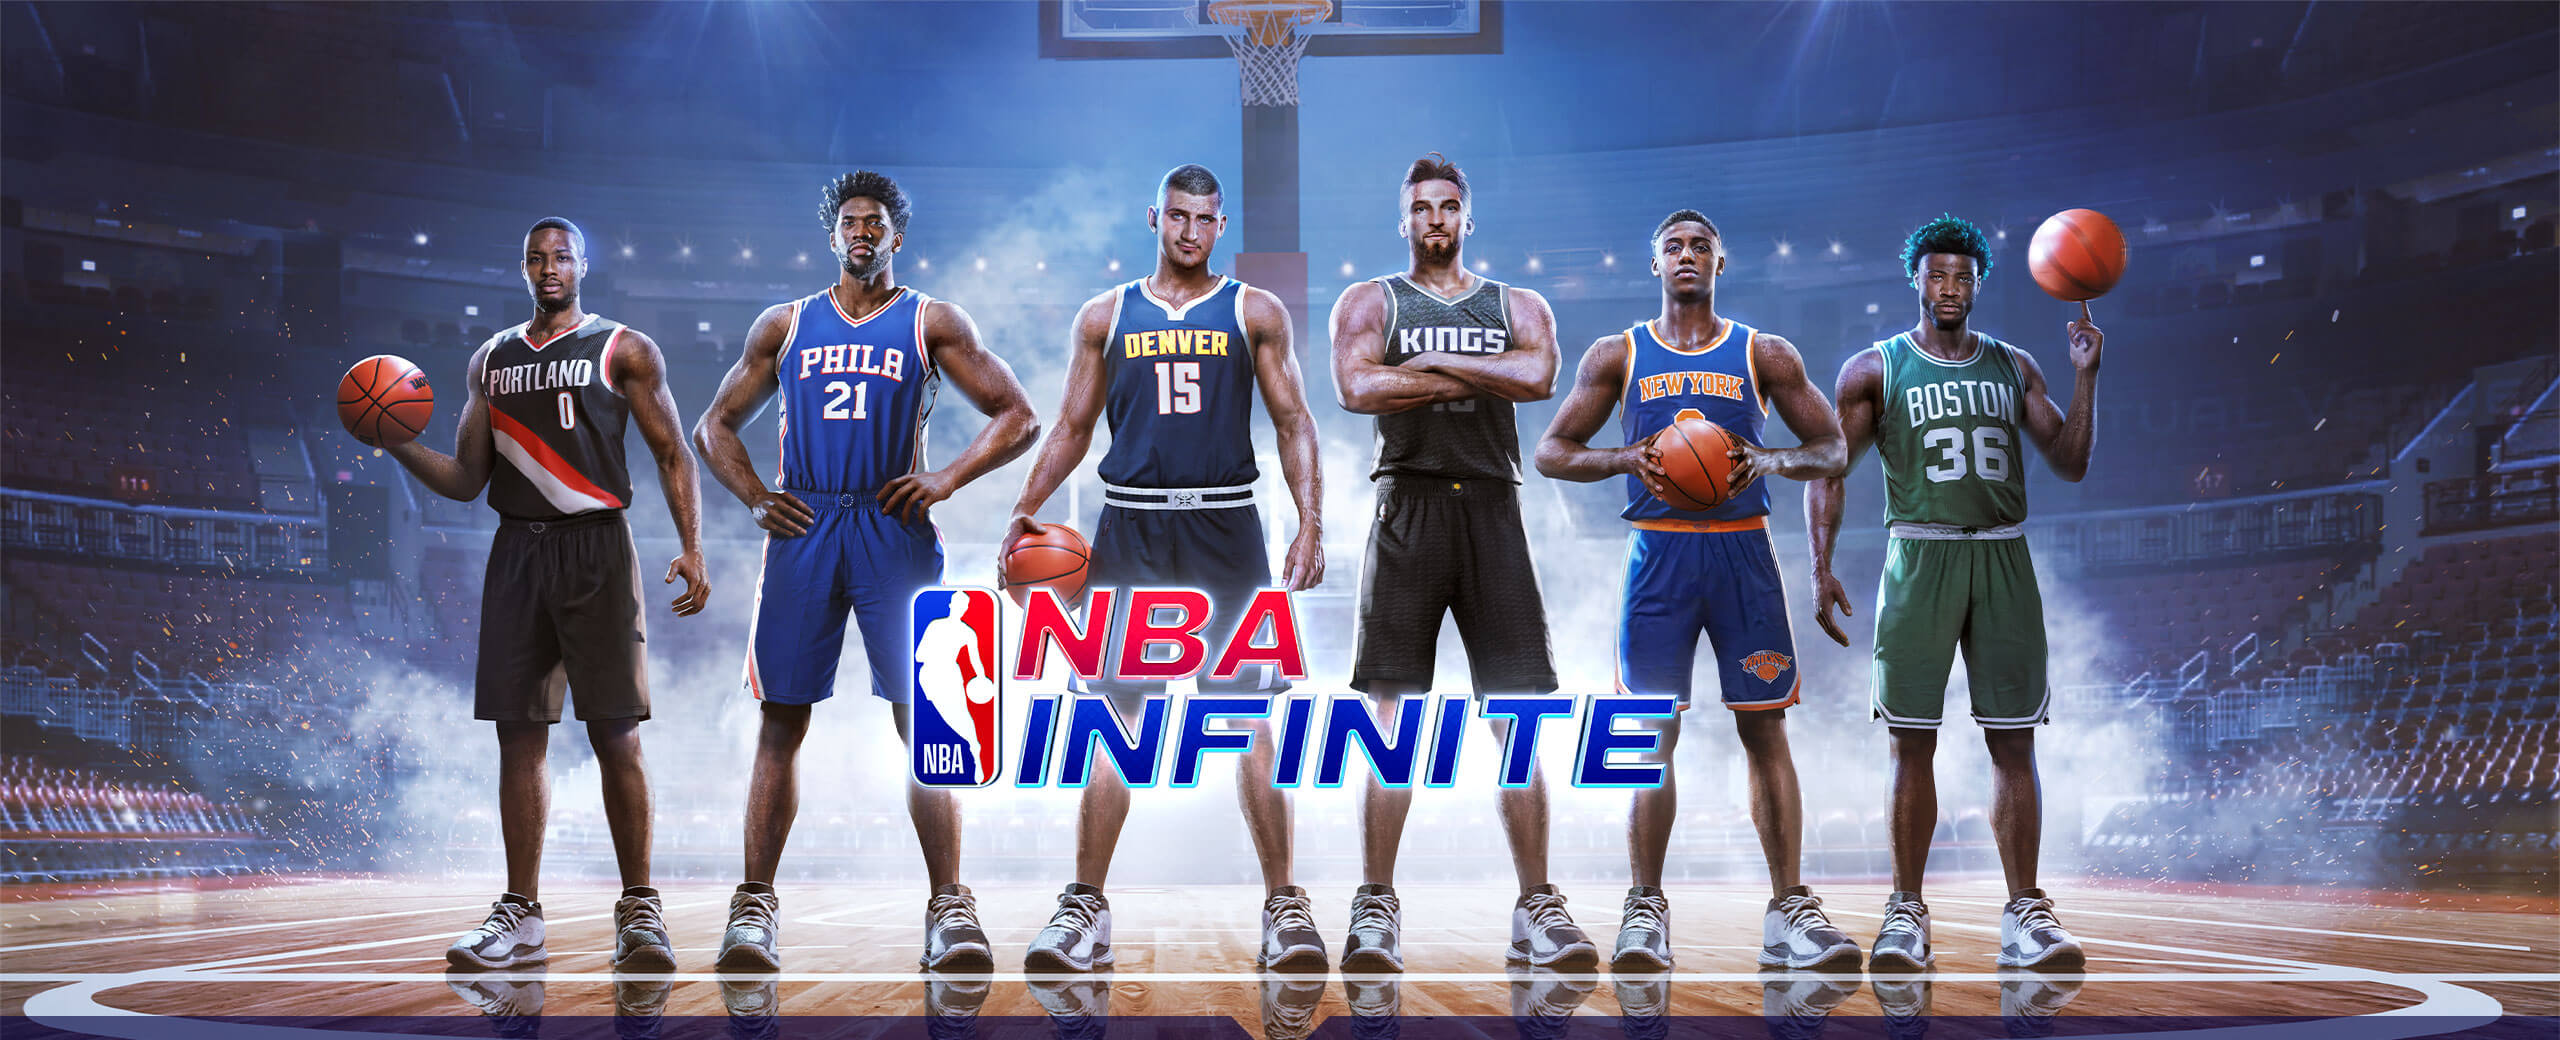 How to Play NBA Infinite on PC With BlueStacks